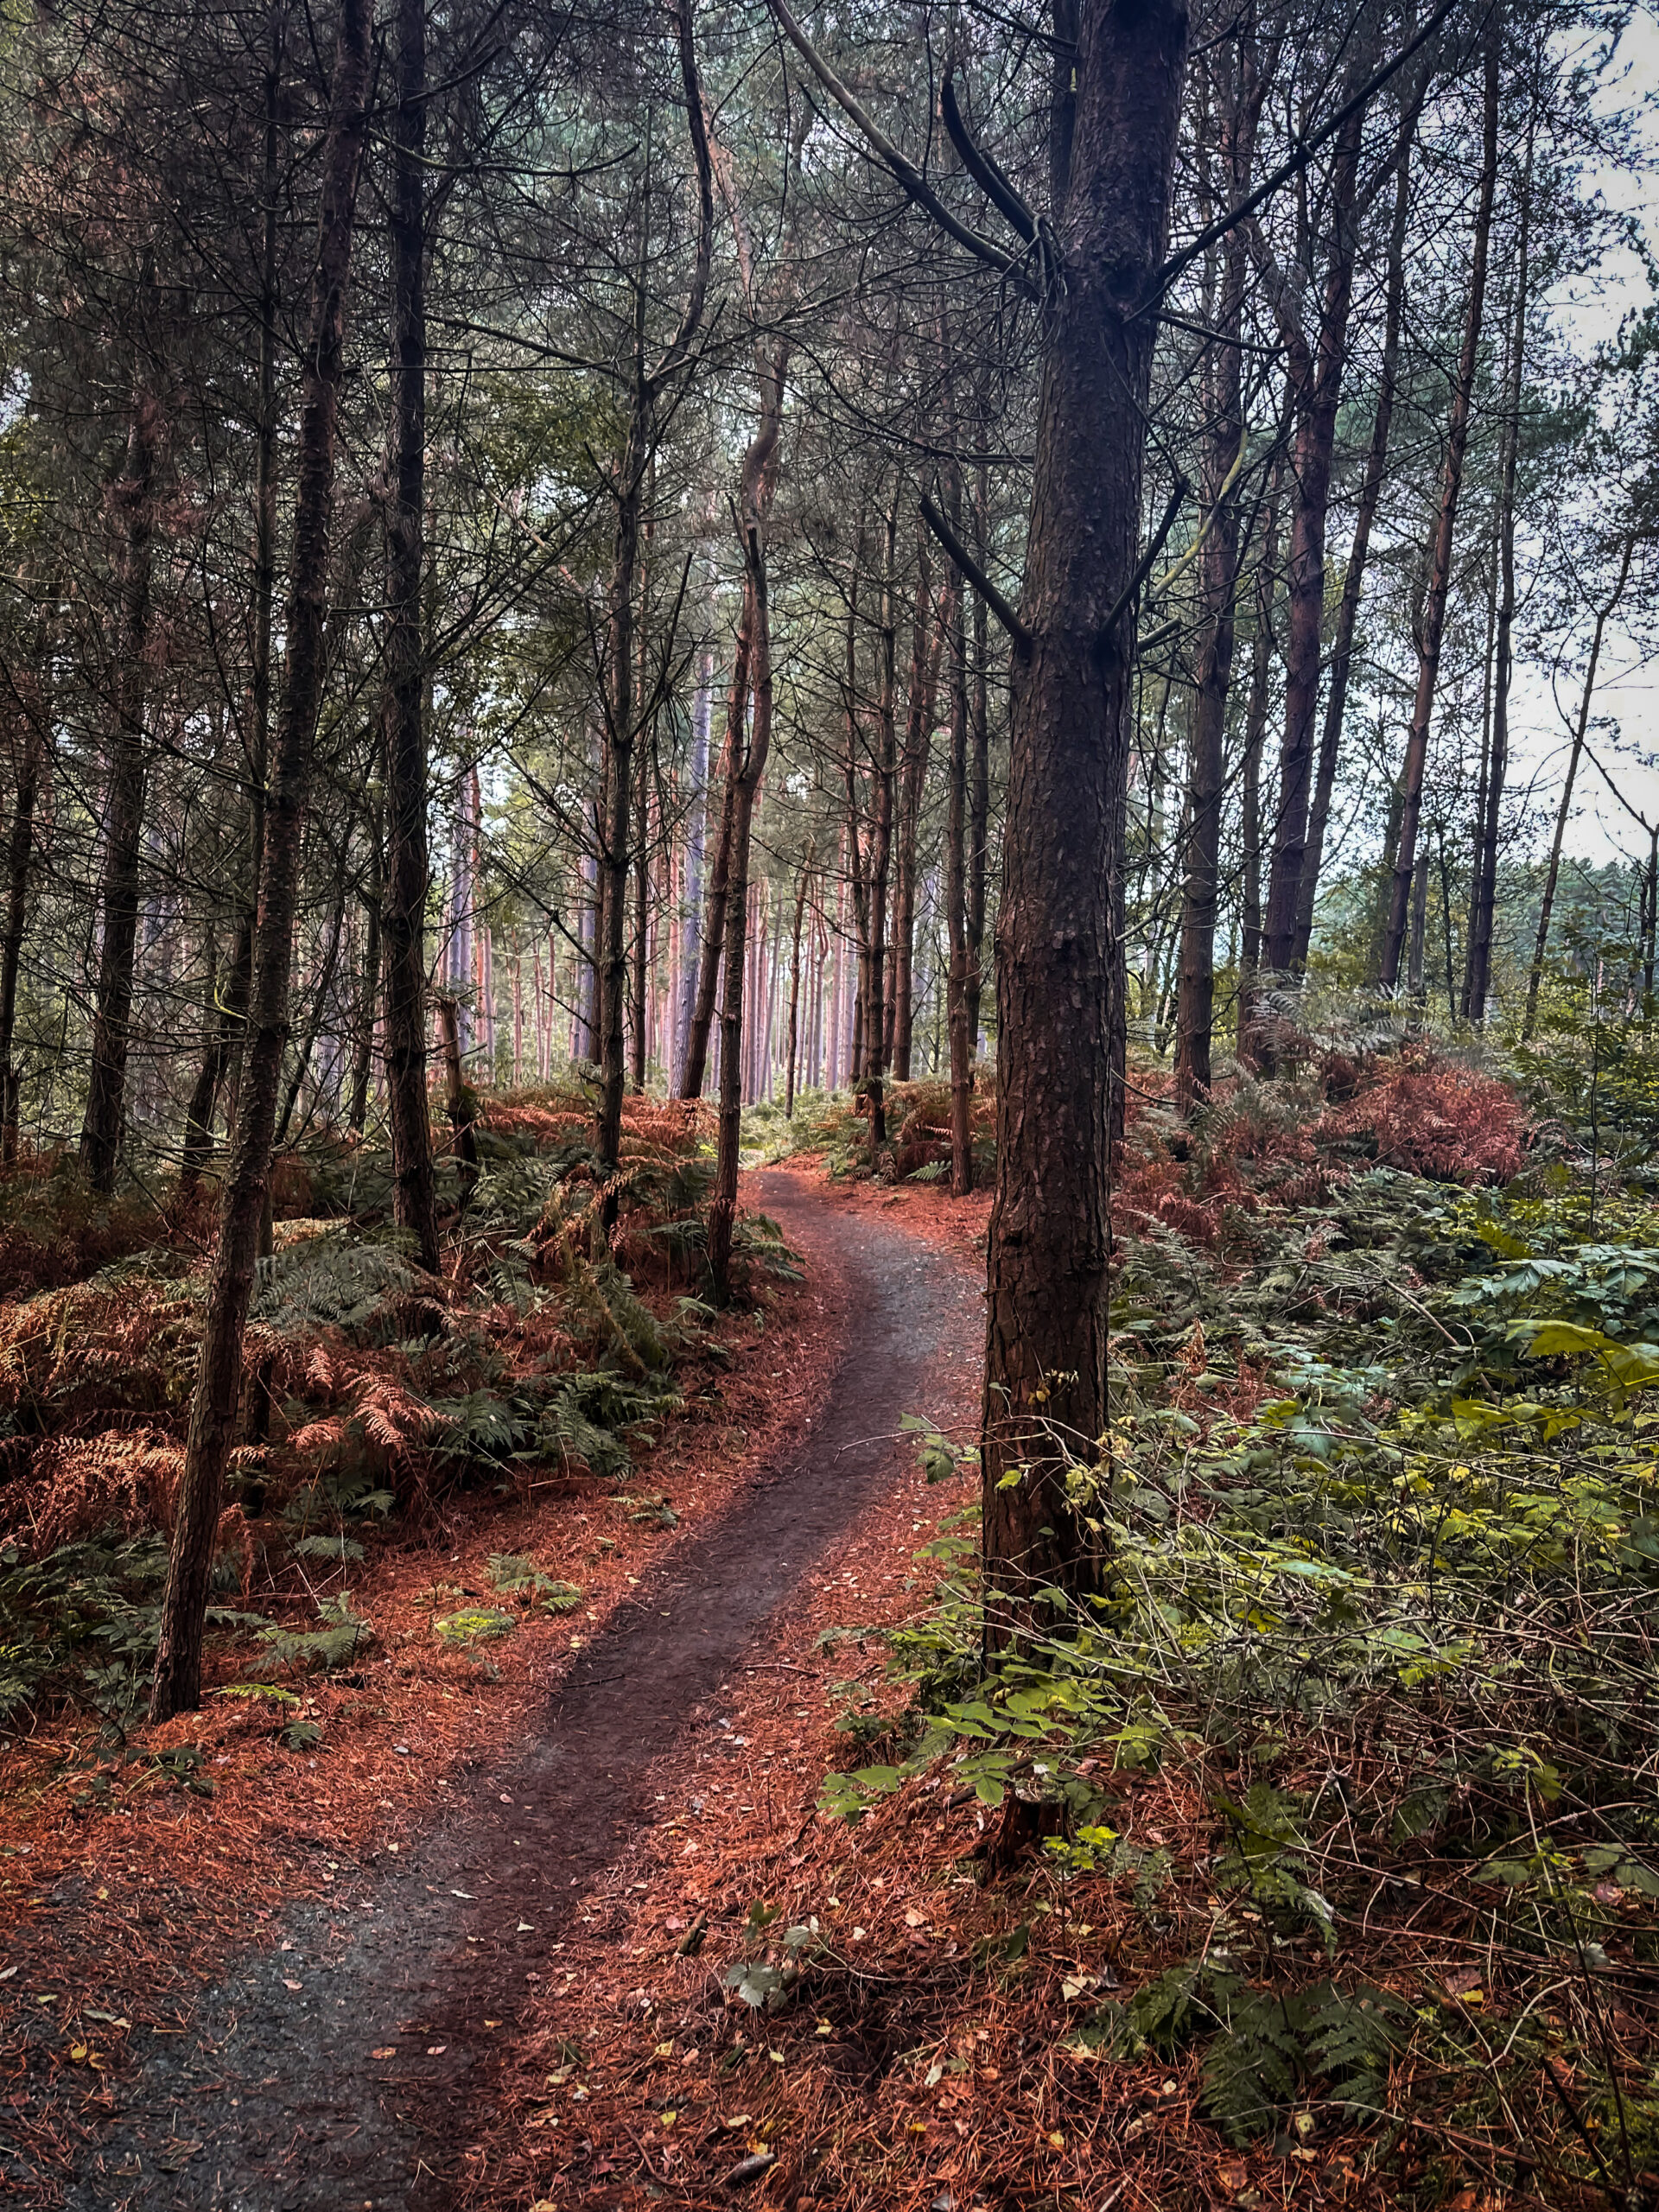 A countryside walk in Delamere Forest